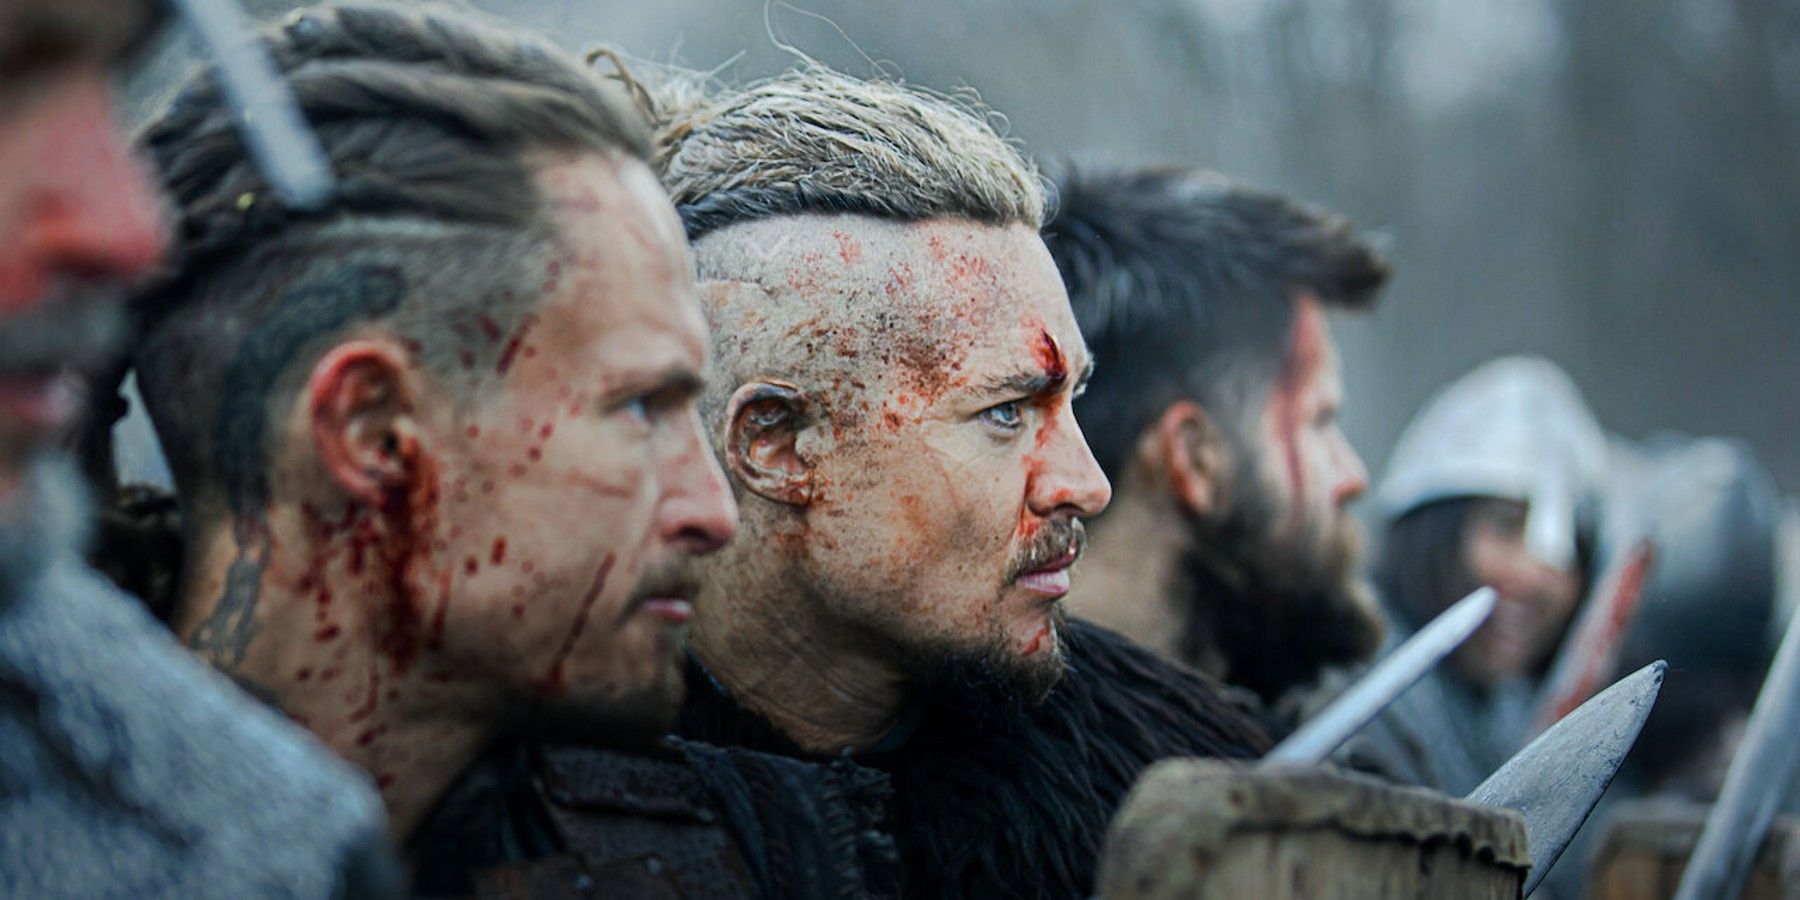 Sihtric, Uhtred, and Finan in The Last Kingdom: Seven Kings Must Die